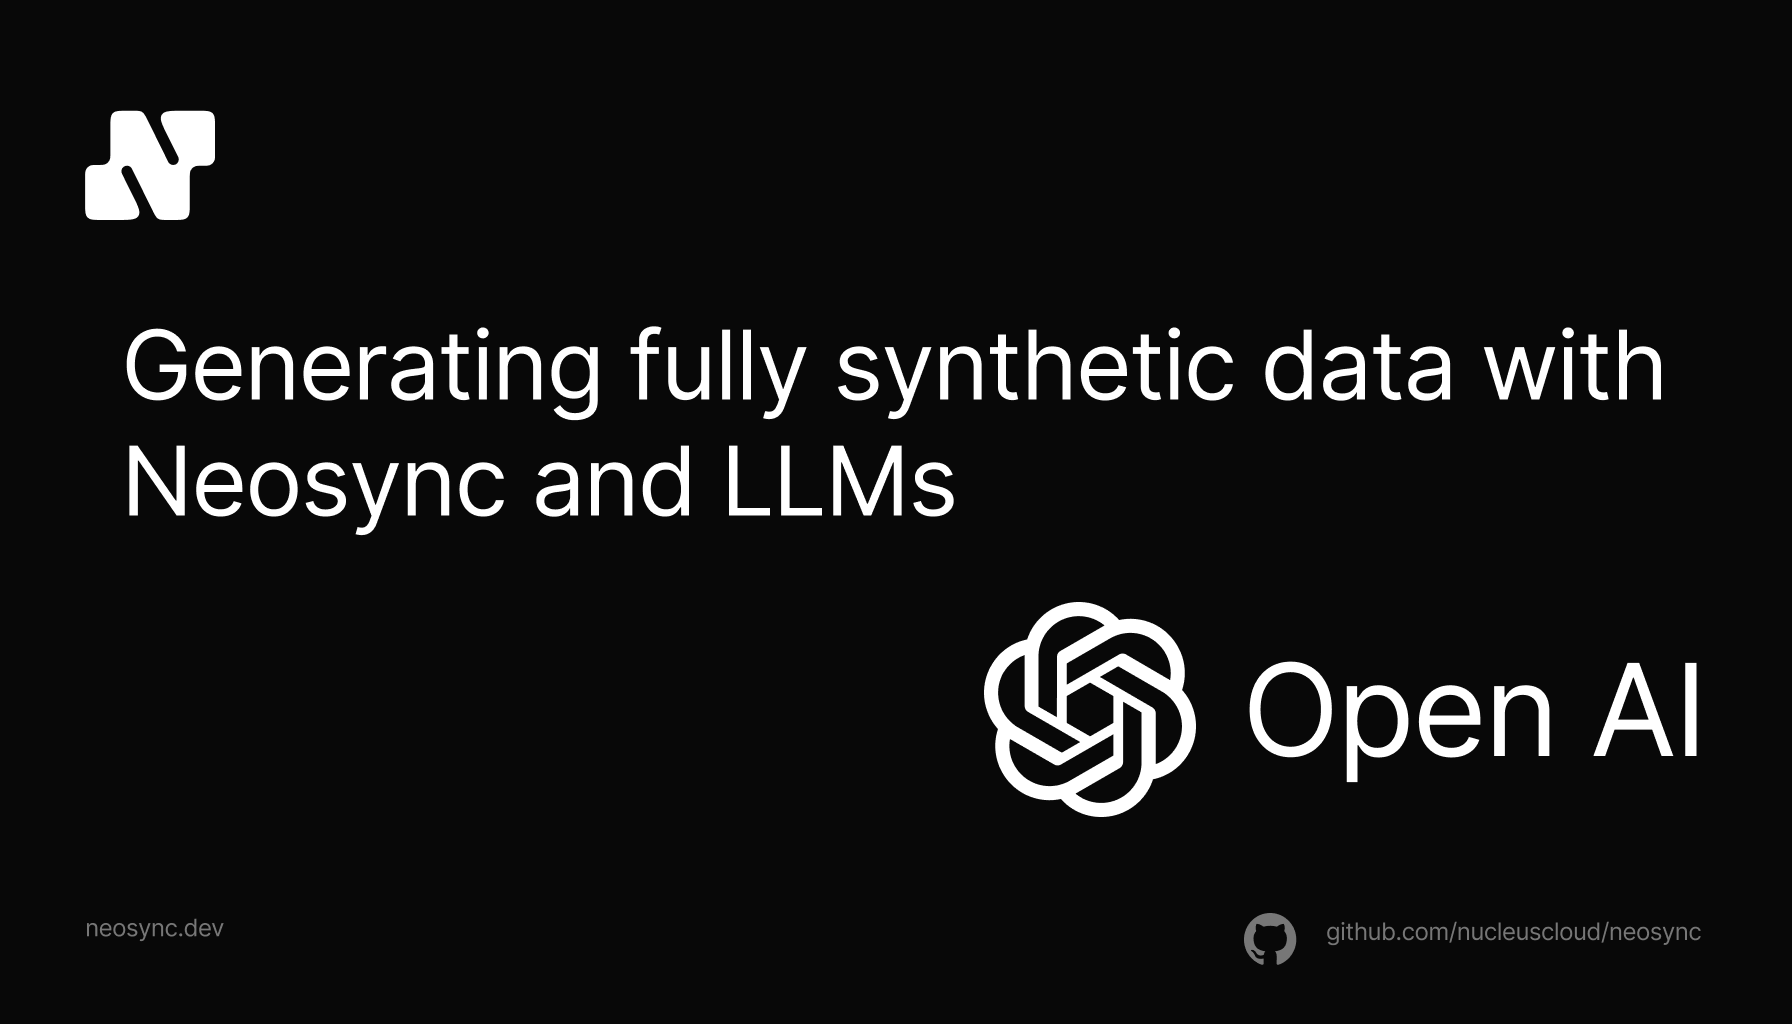 Generating Synthetic Data with LLMs